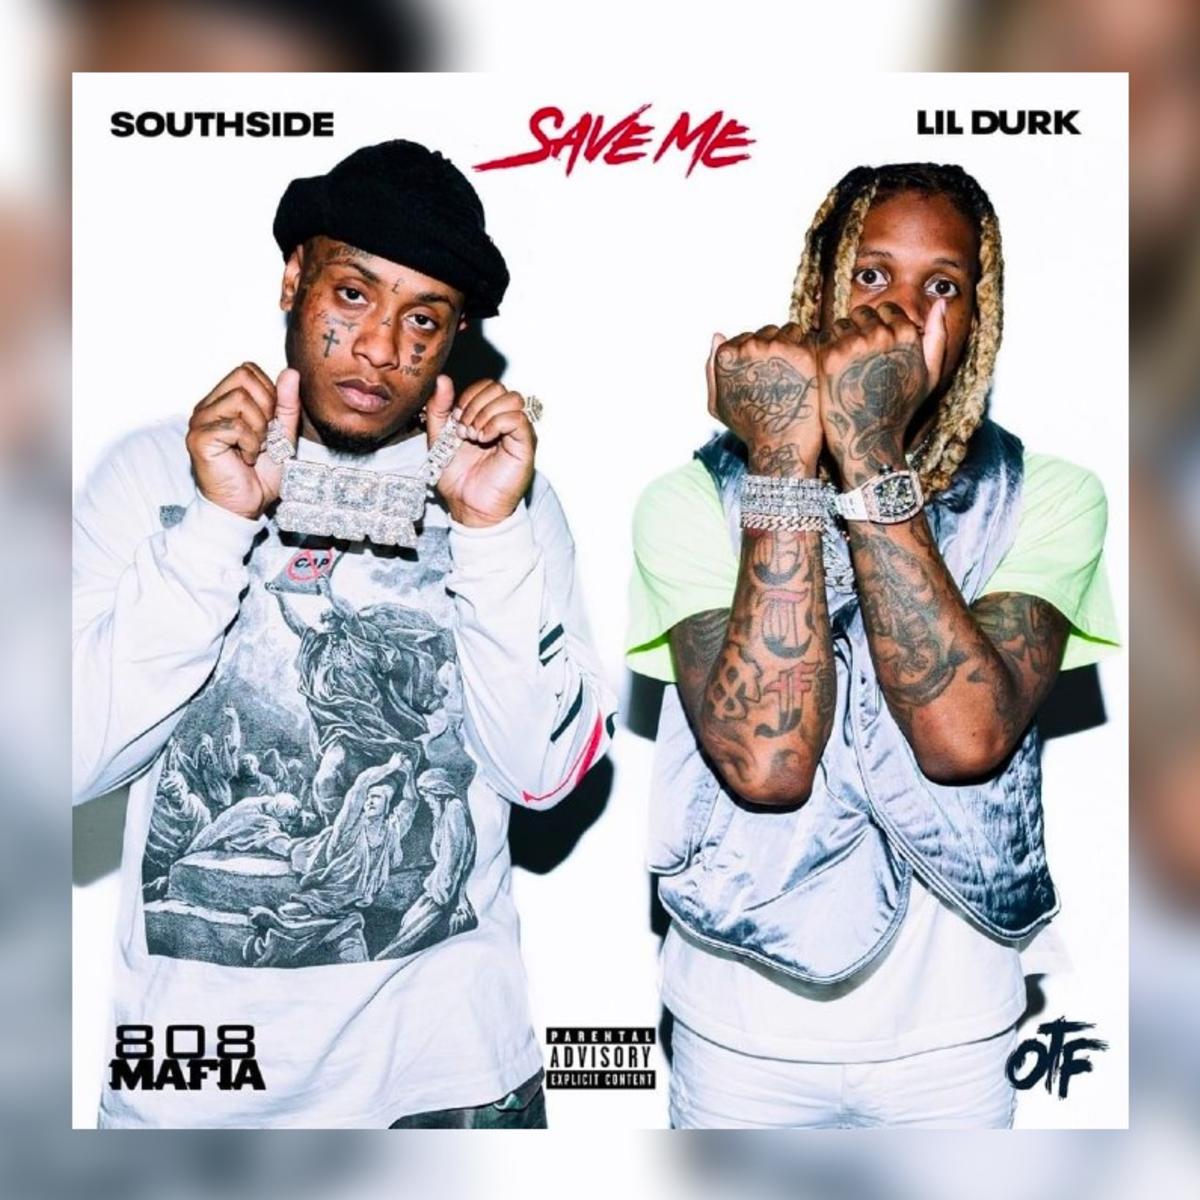 Southside & Lil Durk Drop The Powerful “Save Me”